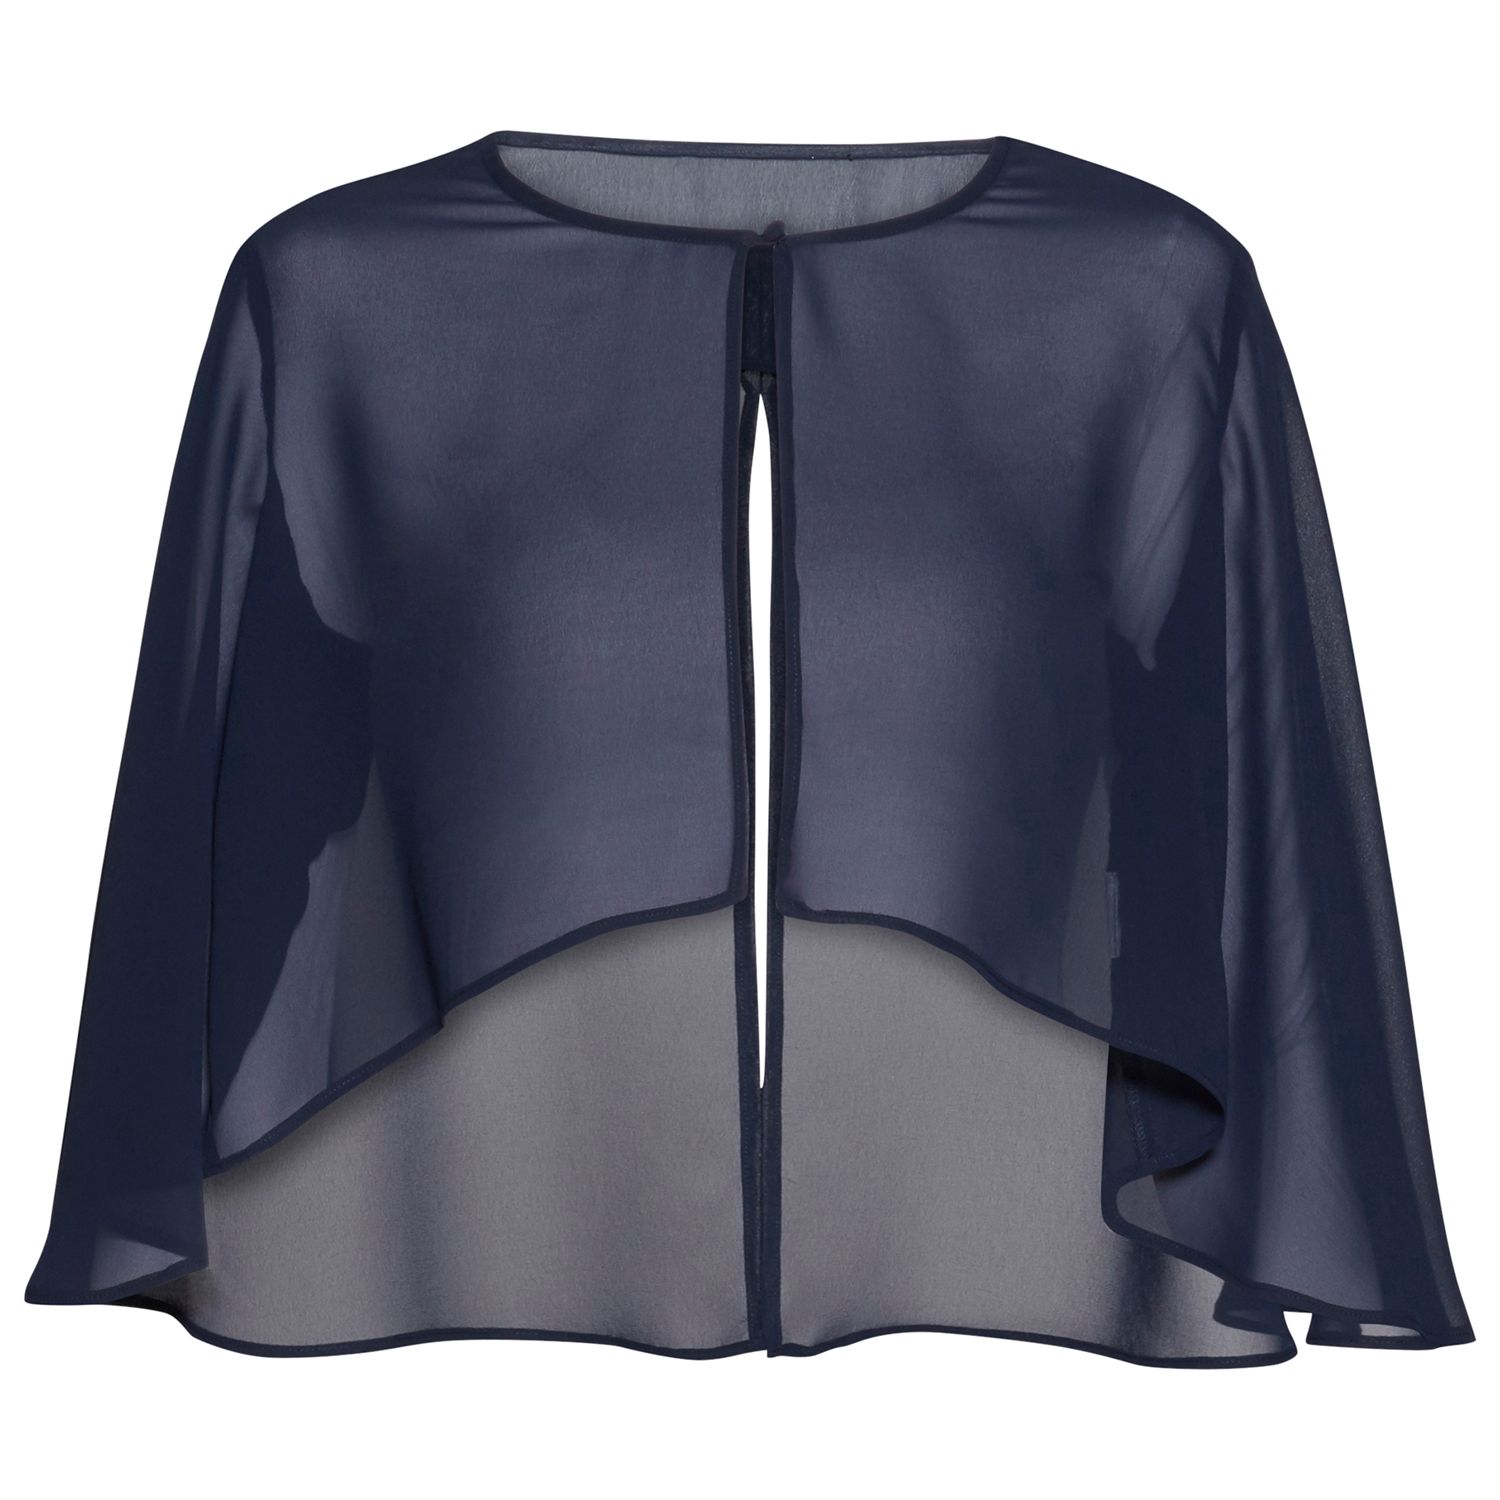 Gina Bacconi Chiffon Cape With Open Back Detail, Spring Navy, 24